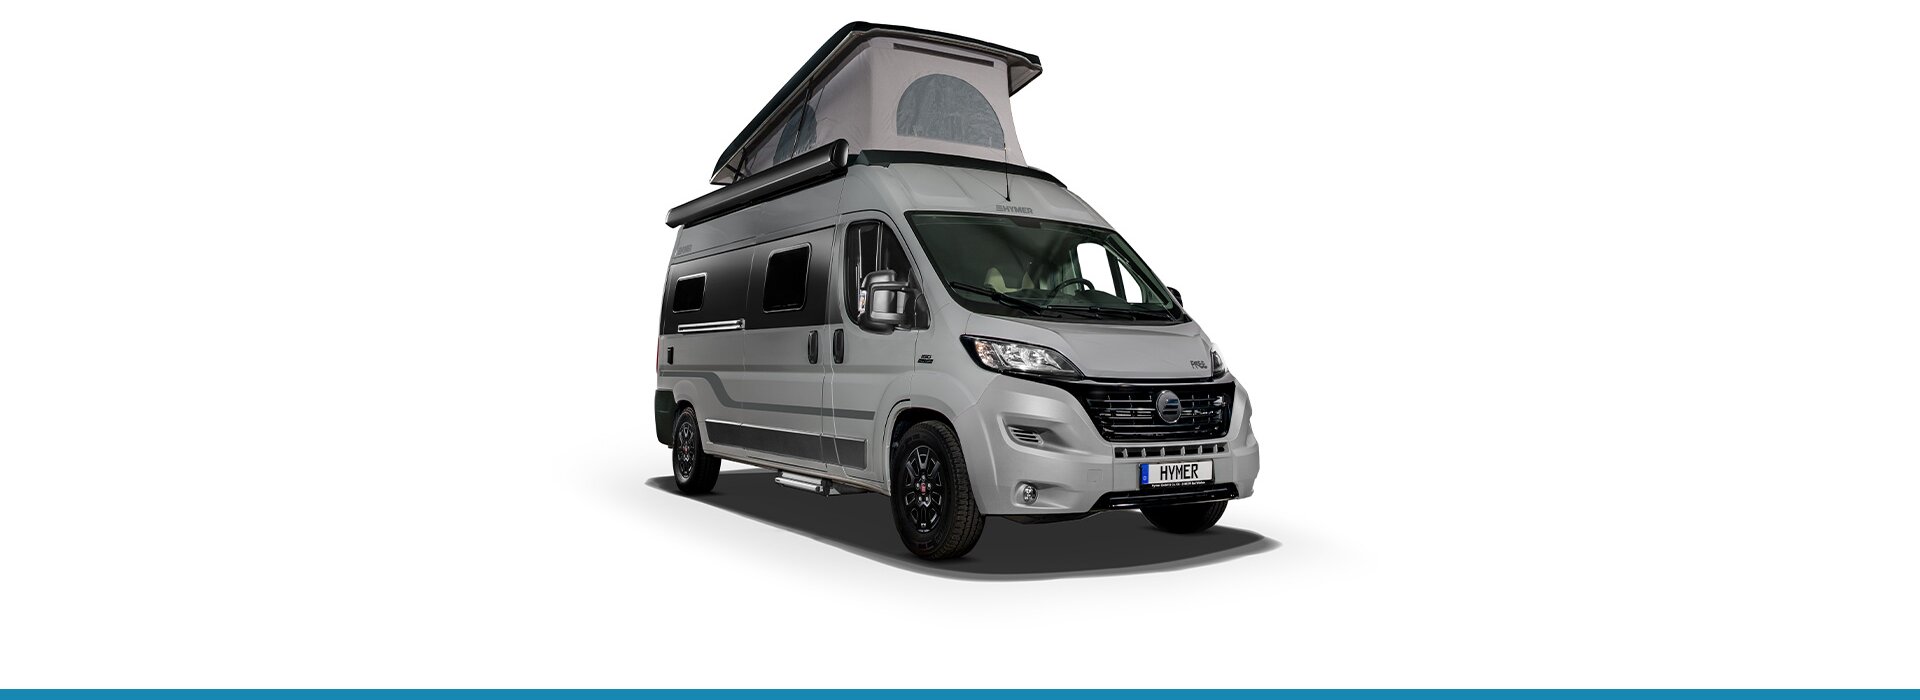 Special Edition model HYMER Free 600 Campus